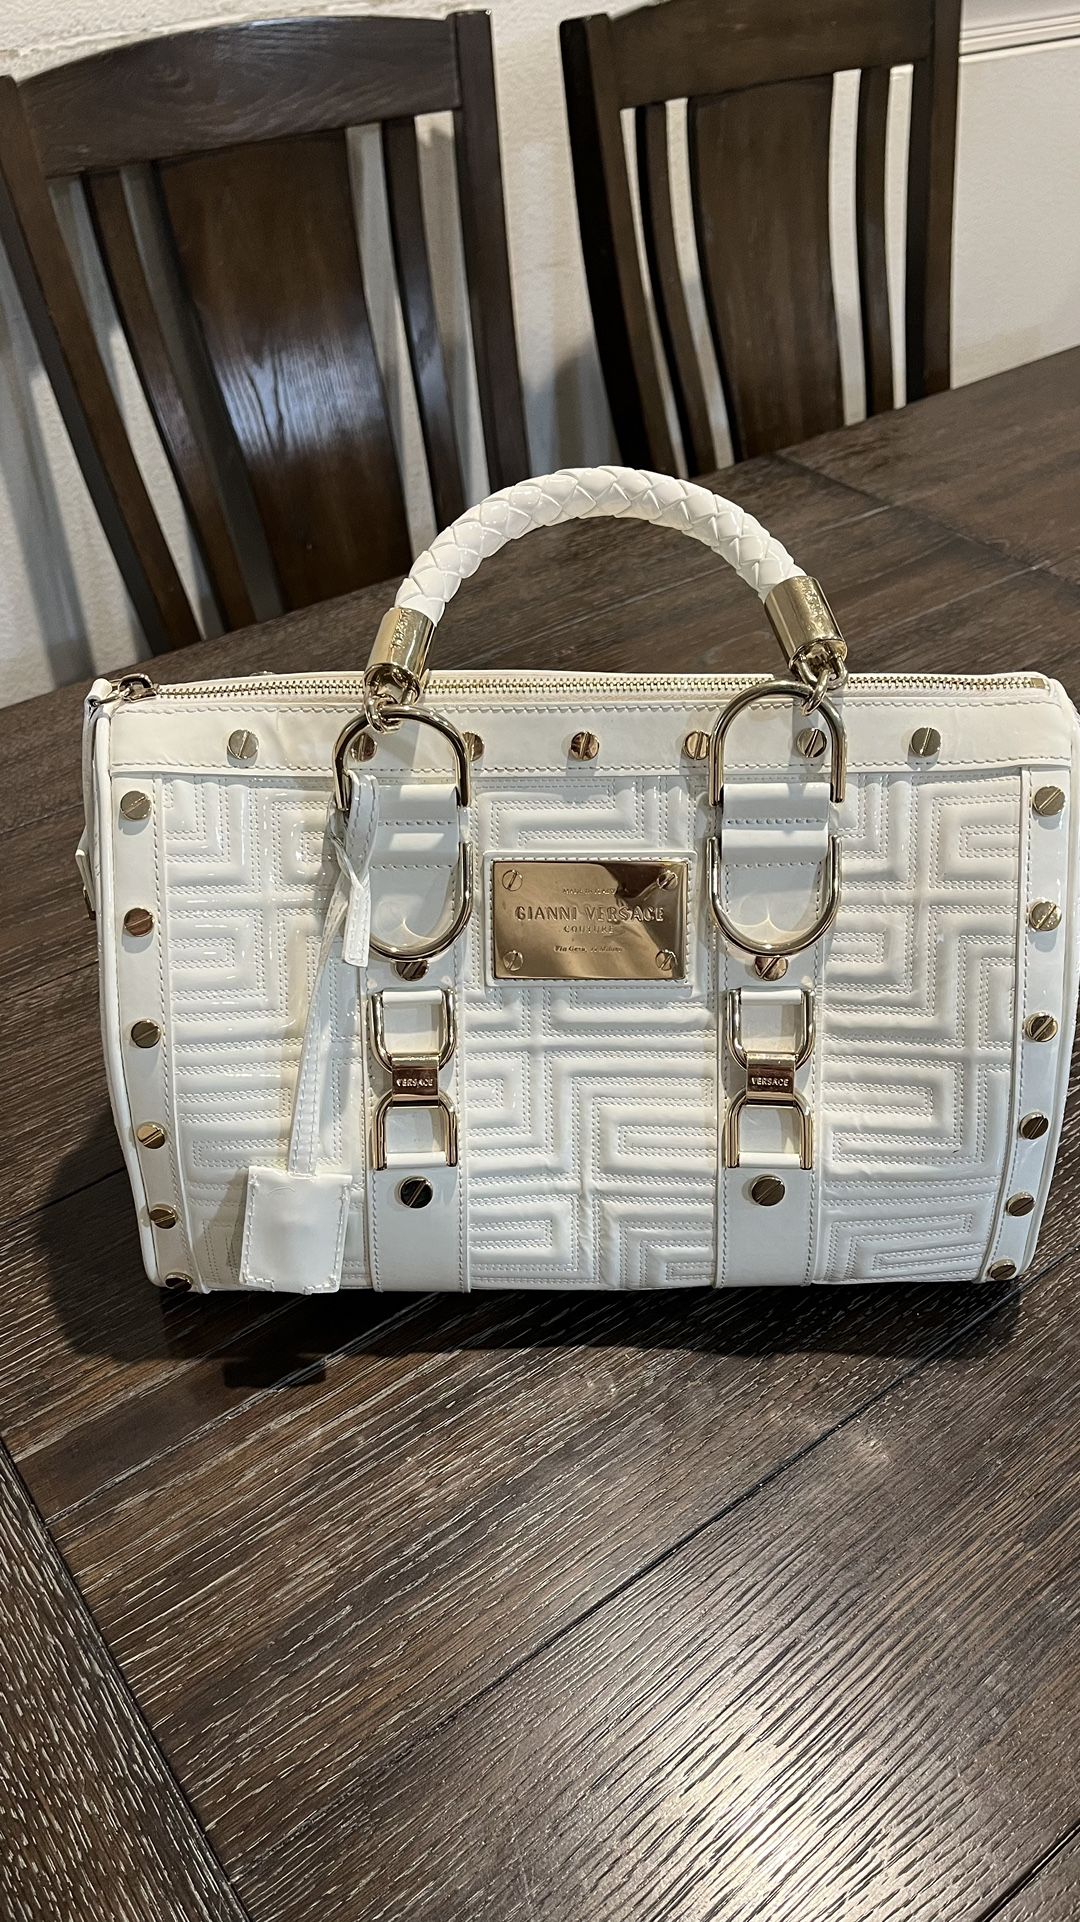 GIANNI VERSACE couture Made In Italy hand Bag, Like New, White With Gold